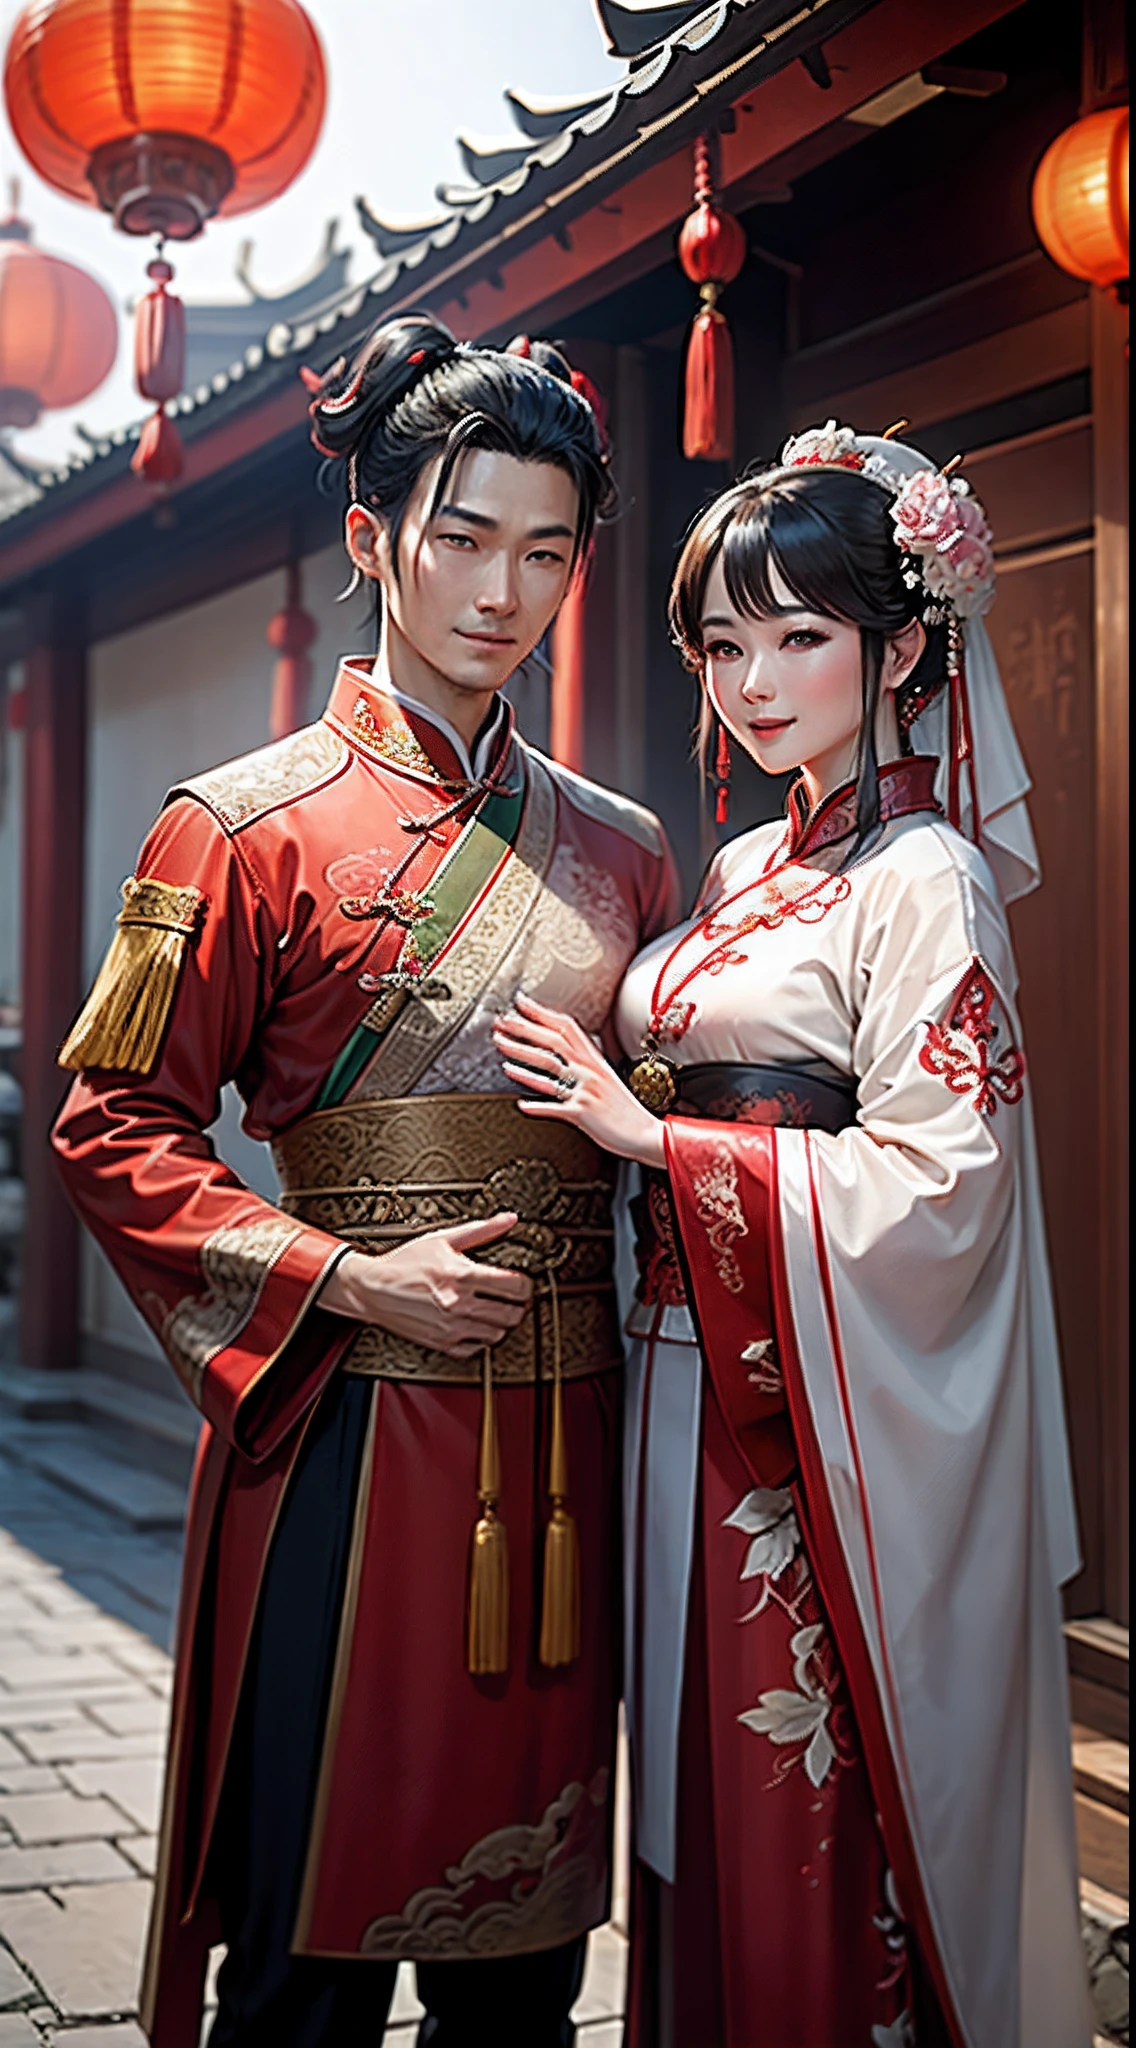 （Best quality: 1.1), (Realistic: 1.1), (Wedding: 1.1), (highly details: 1.1),A traditional Chinese wedding is taking place，The bride and groom pose for photos in traditional Chinese costumes, Stand in front of a Chinese-style building, Happy smile, Look at each other affectionately，Chinese courtyard in the background，Red lanterns。